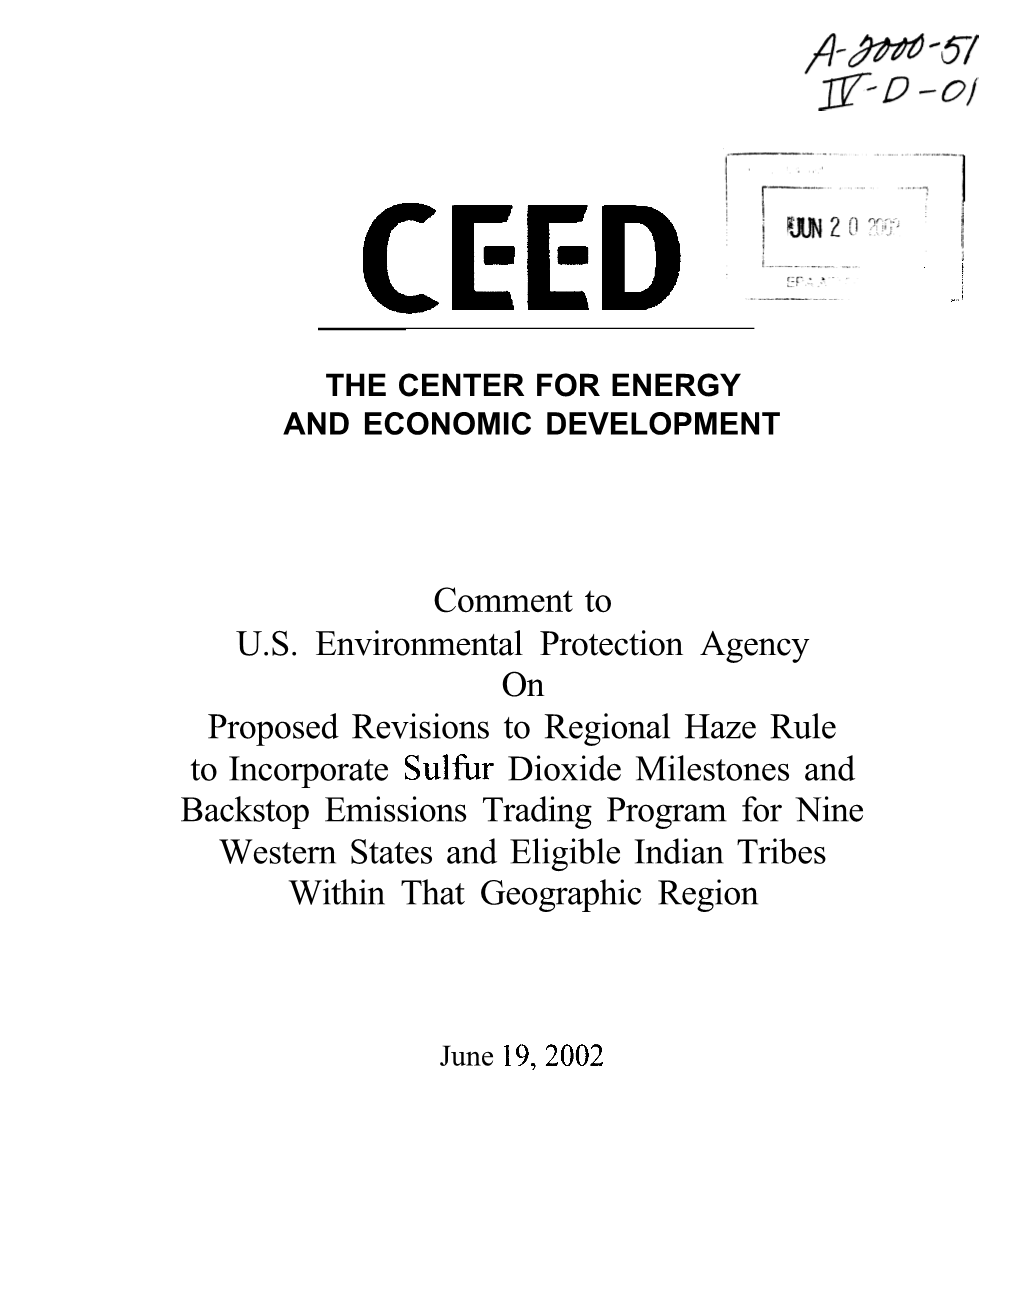 CEED the CENTER for ENERGY and ECONOMIC DEVELOPMENT June 19,2002